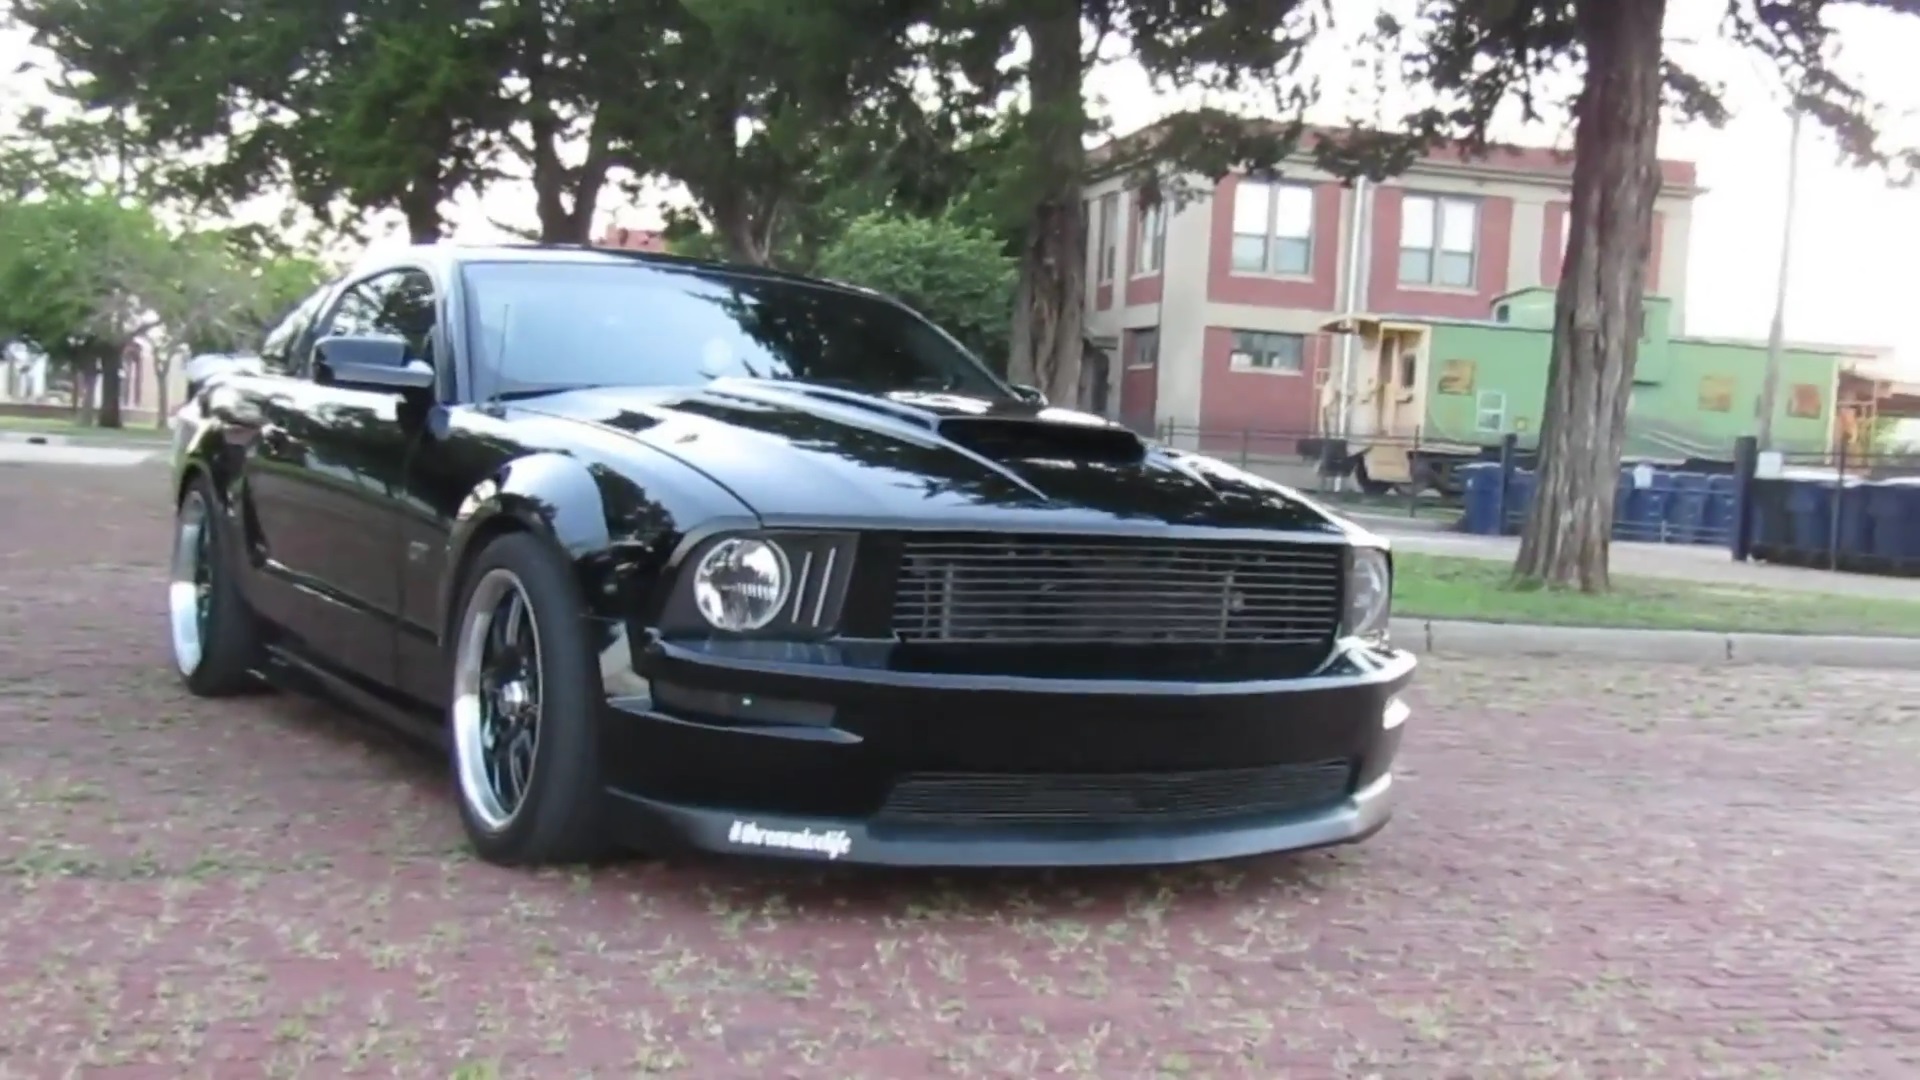 Video: 2006 Mustang GT Full Overview